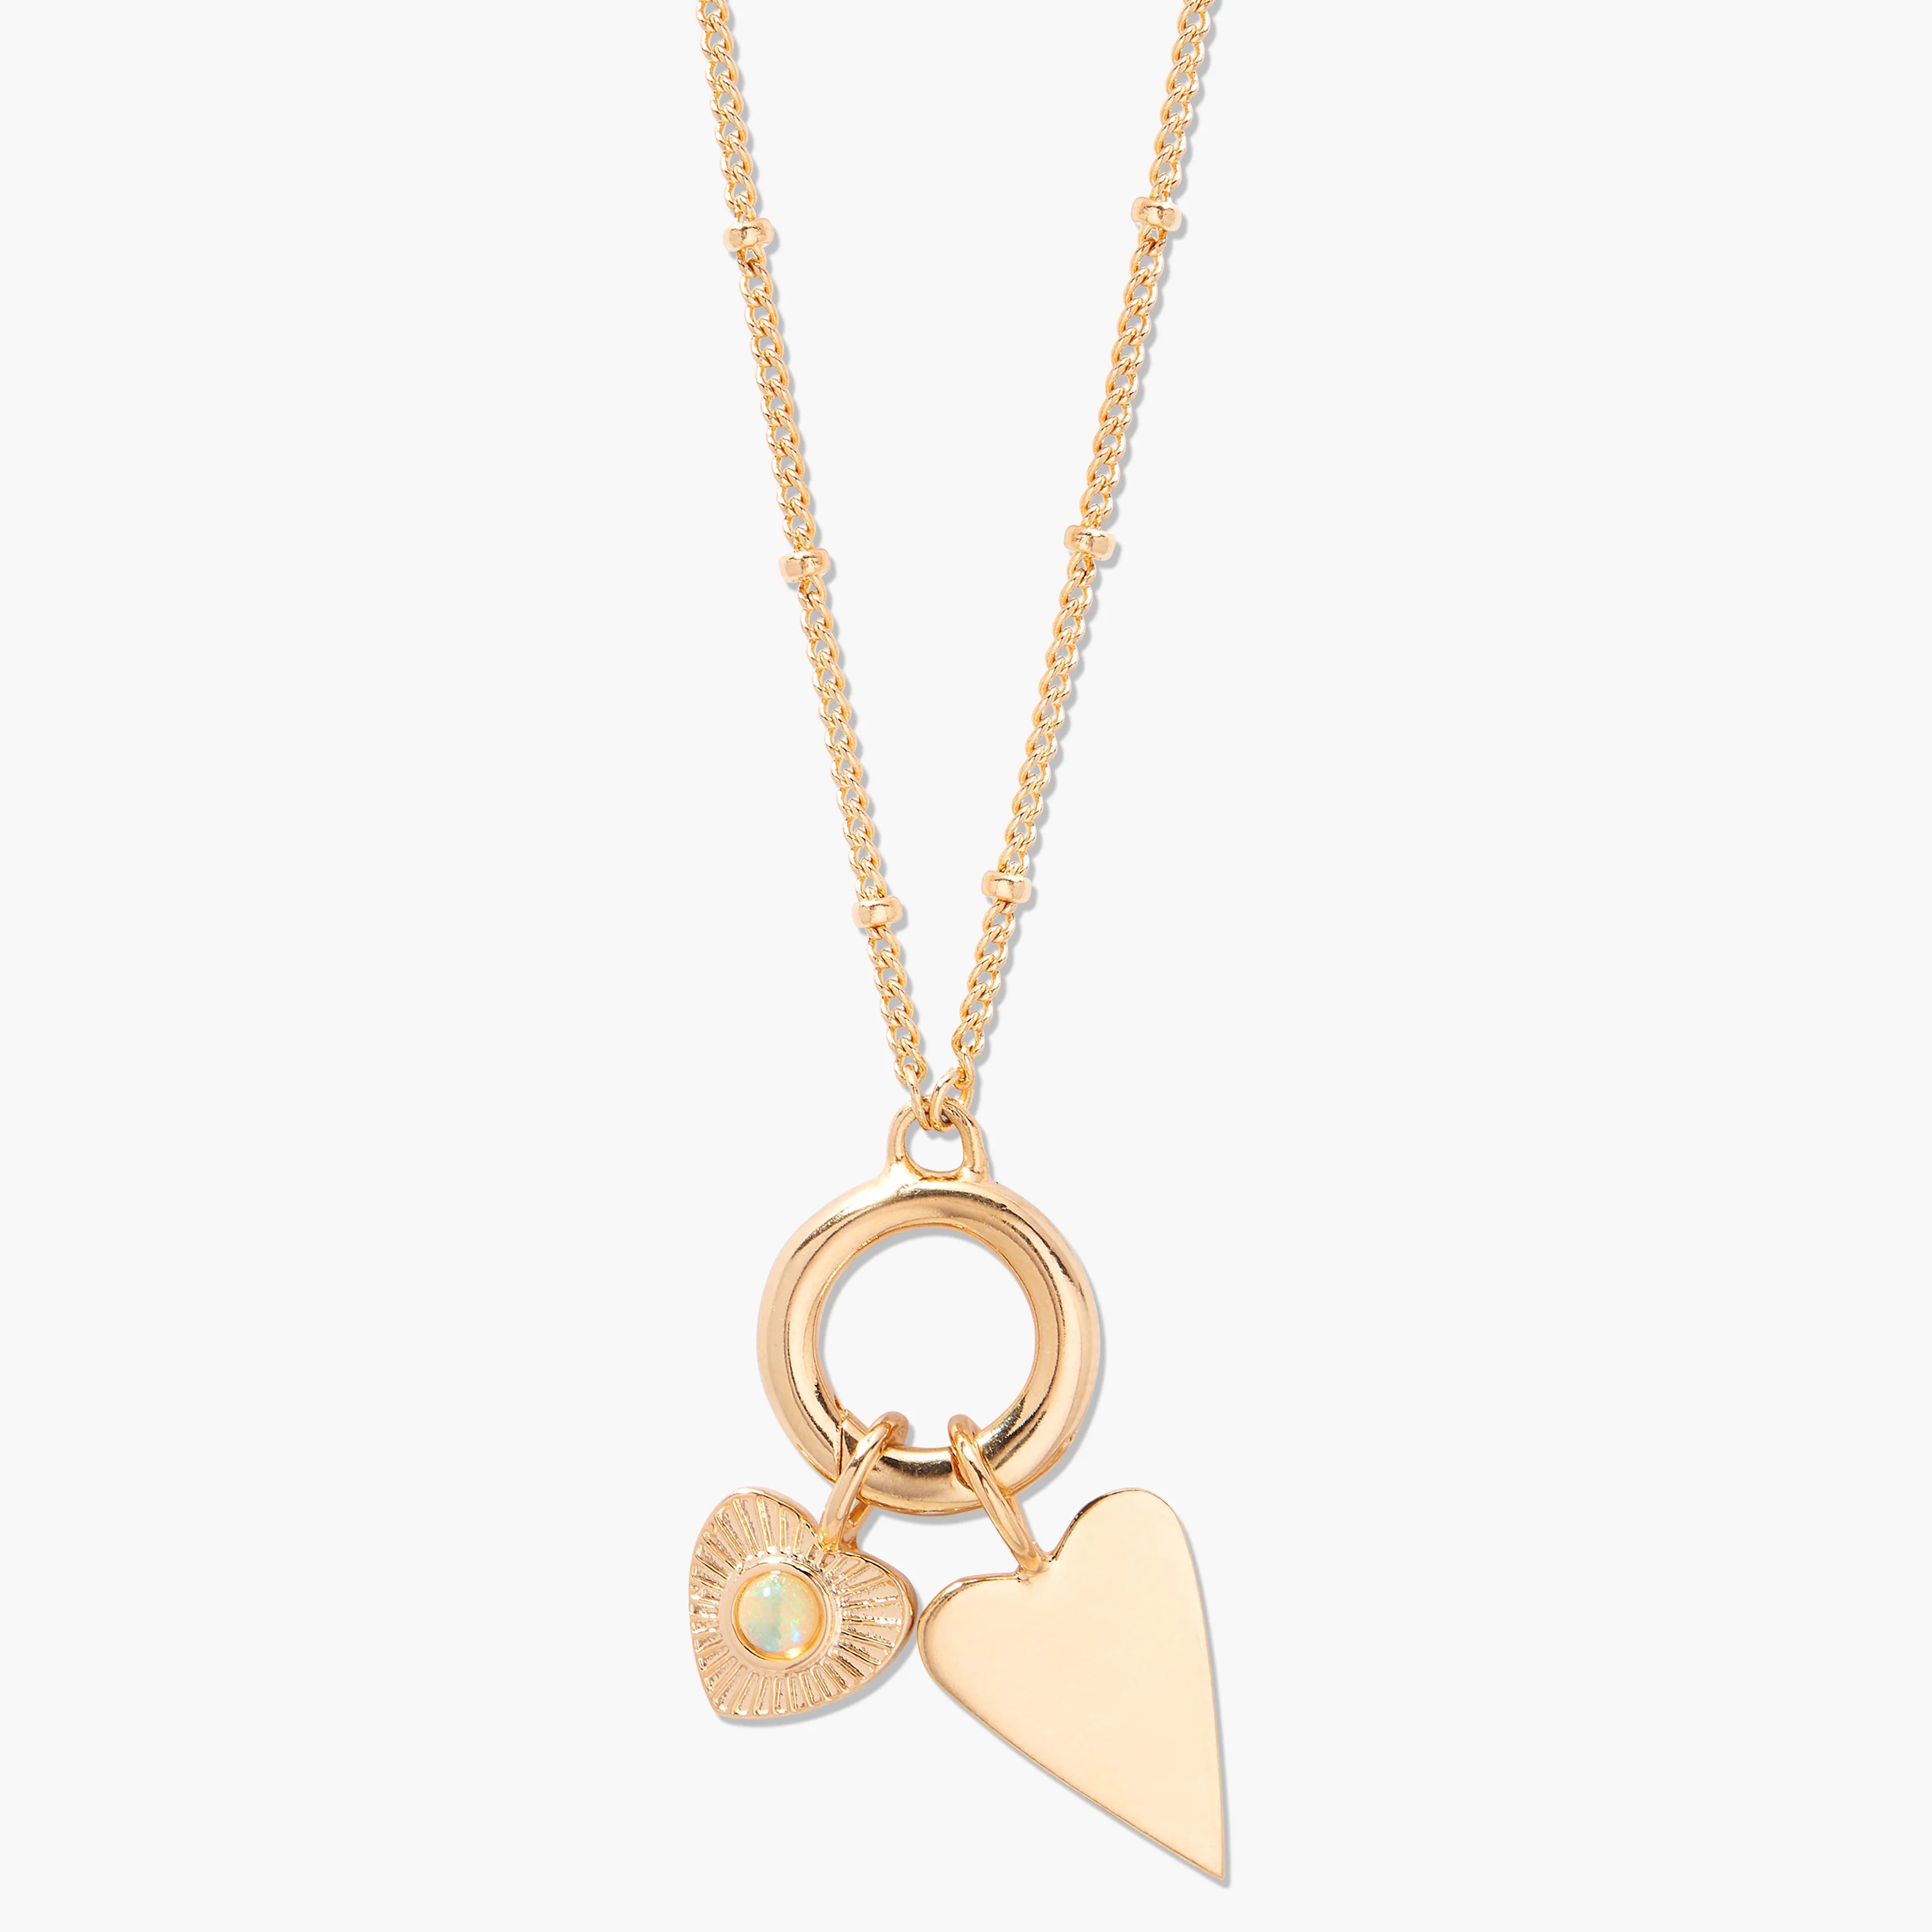 Cameron Heart Charm Set Necklace | Brook and York